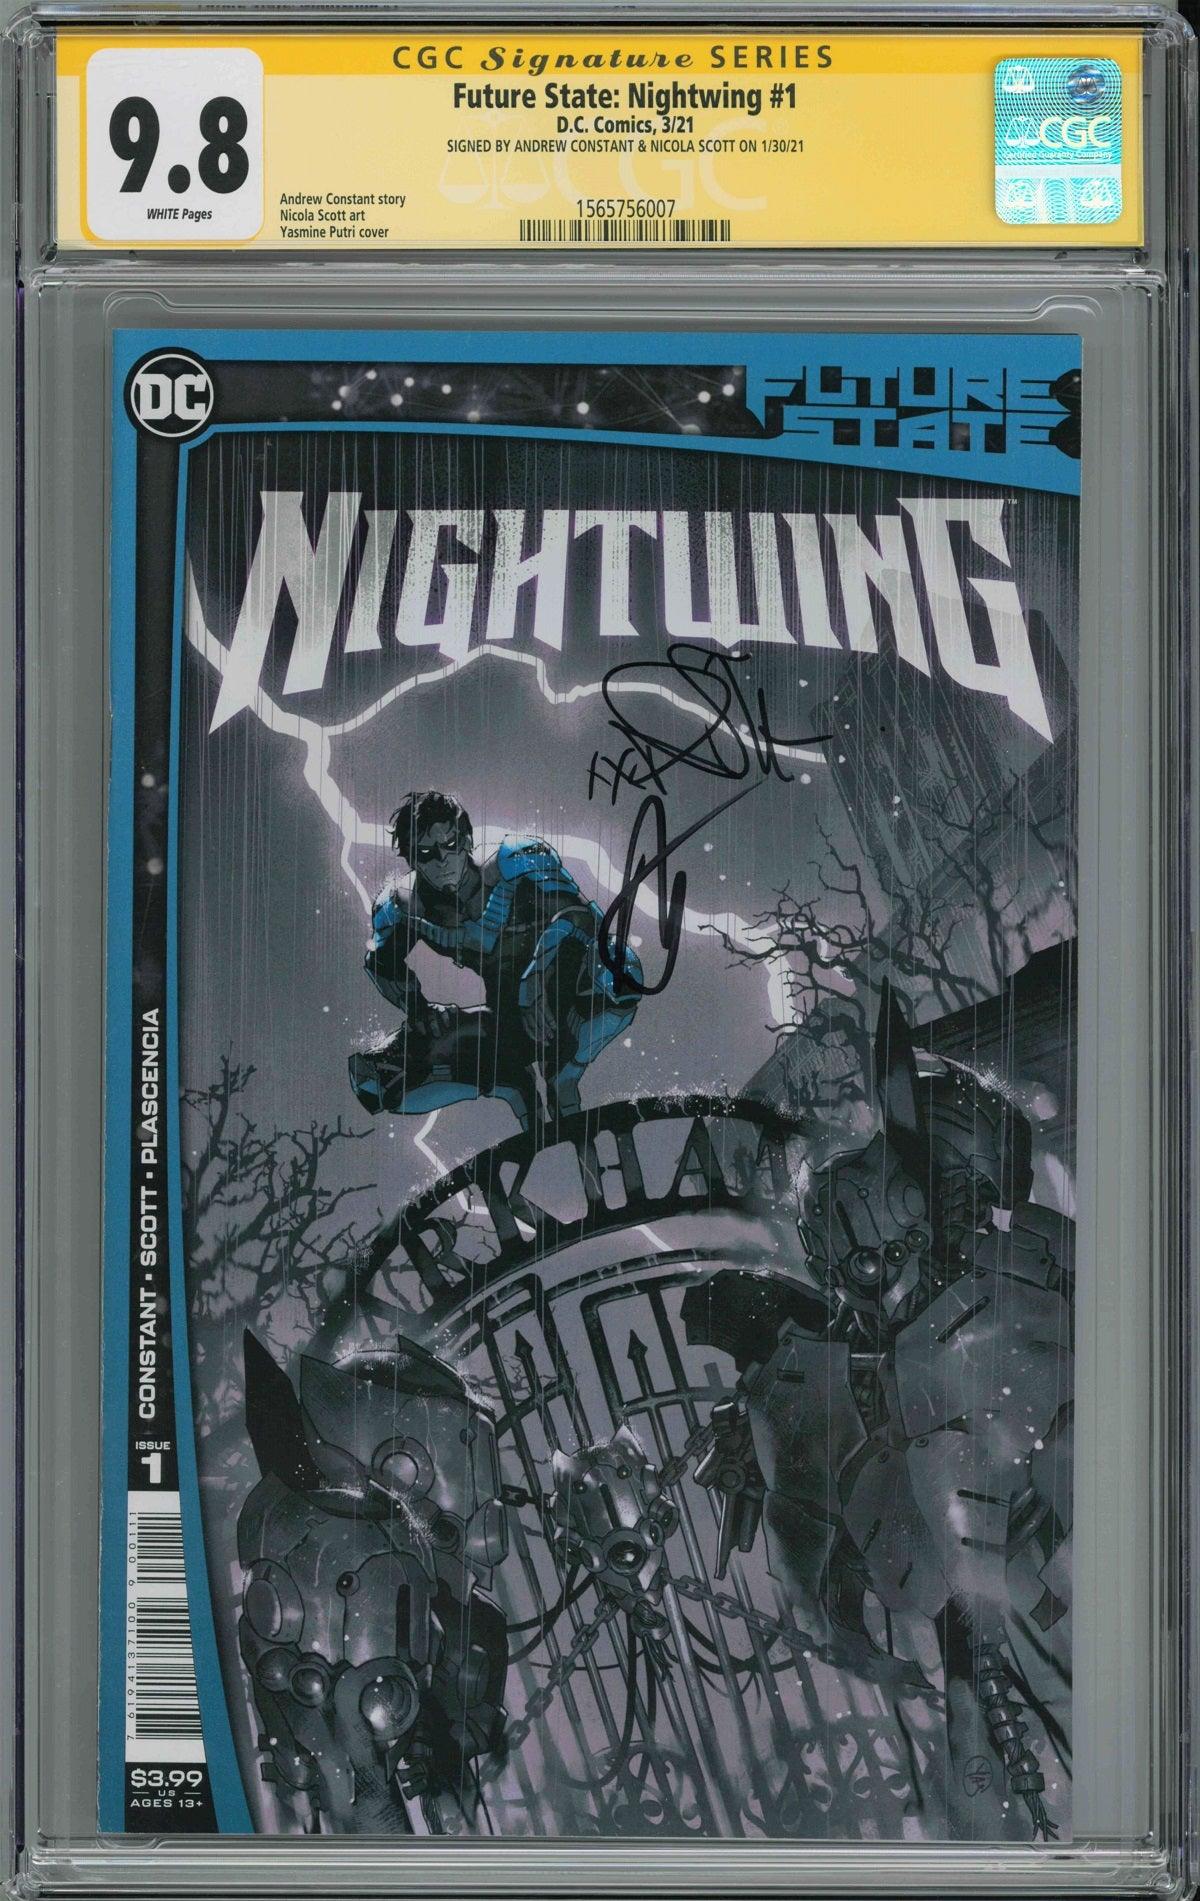 CGC FUTURE STATE NIGHTWING #1 (9.8) SIGNATURE SERIES - SIGNED BY ANDREW CONSTANT & NICOLA SCOTT - Kings Comics